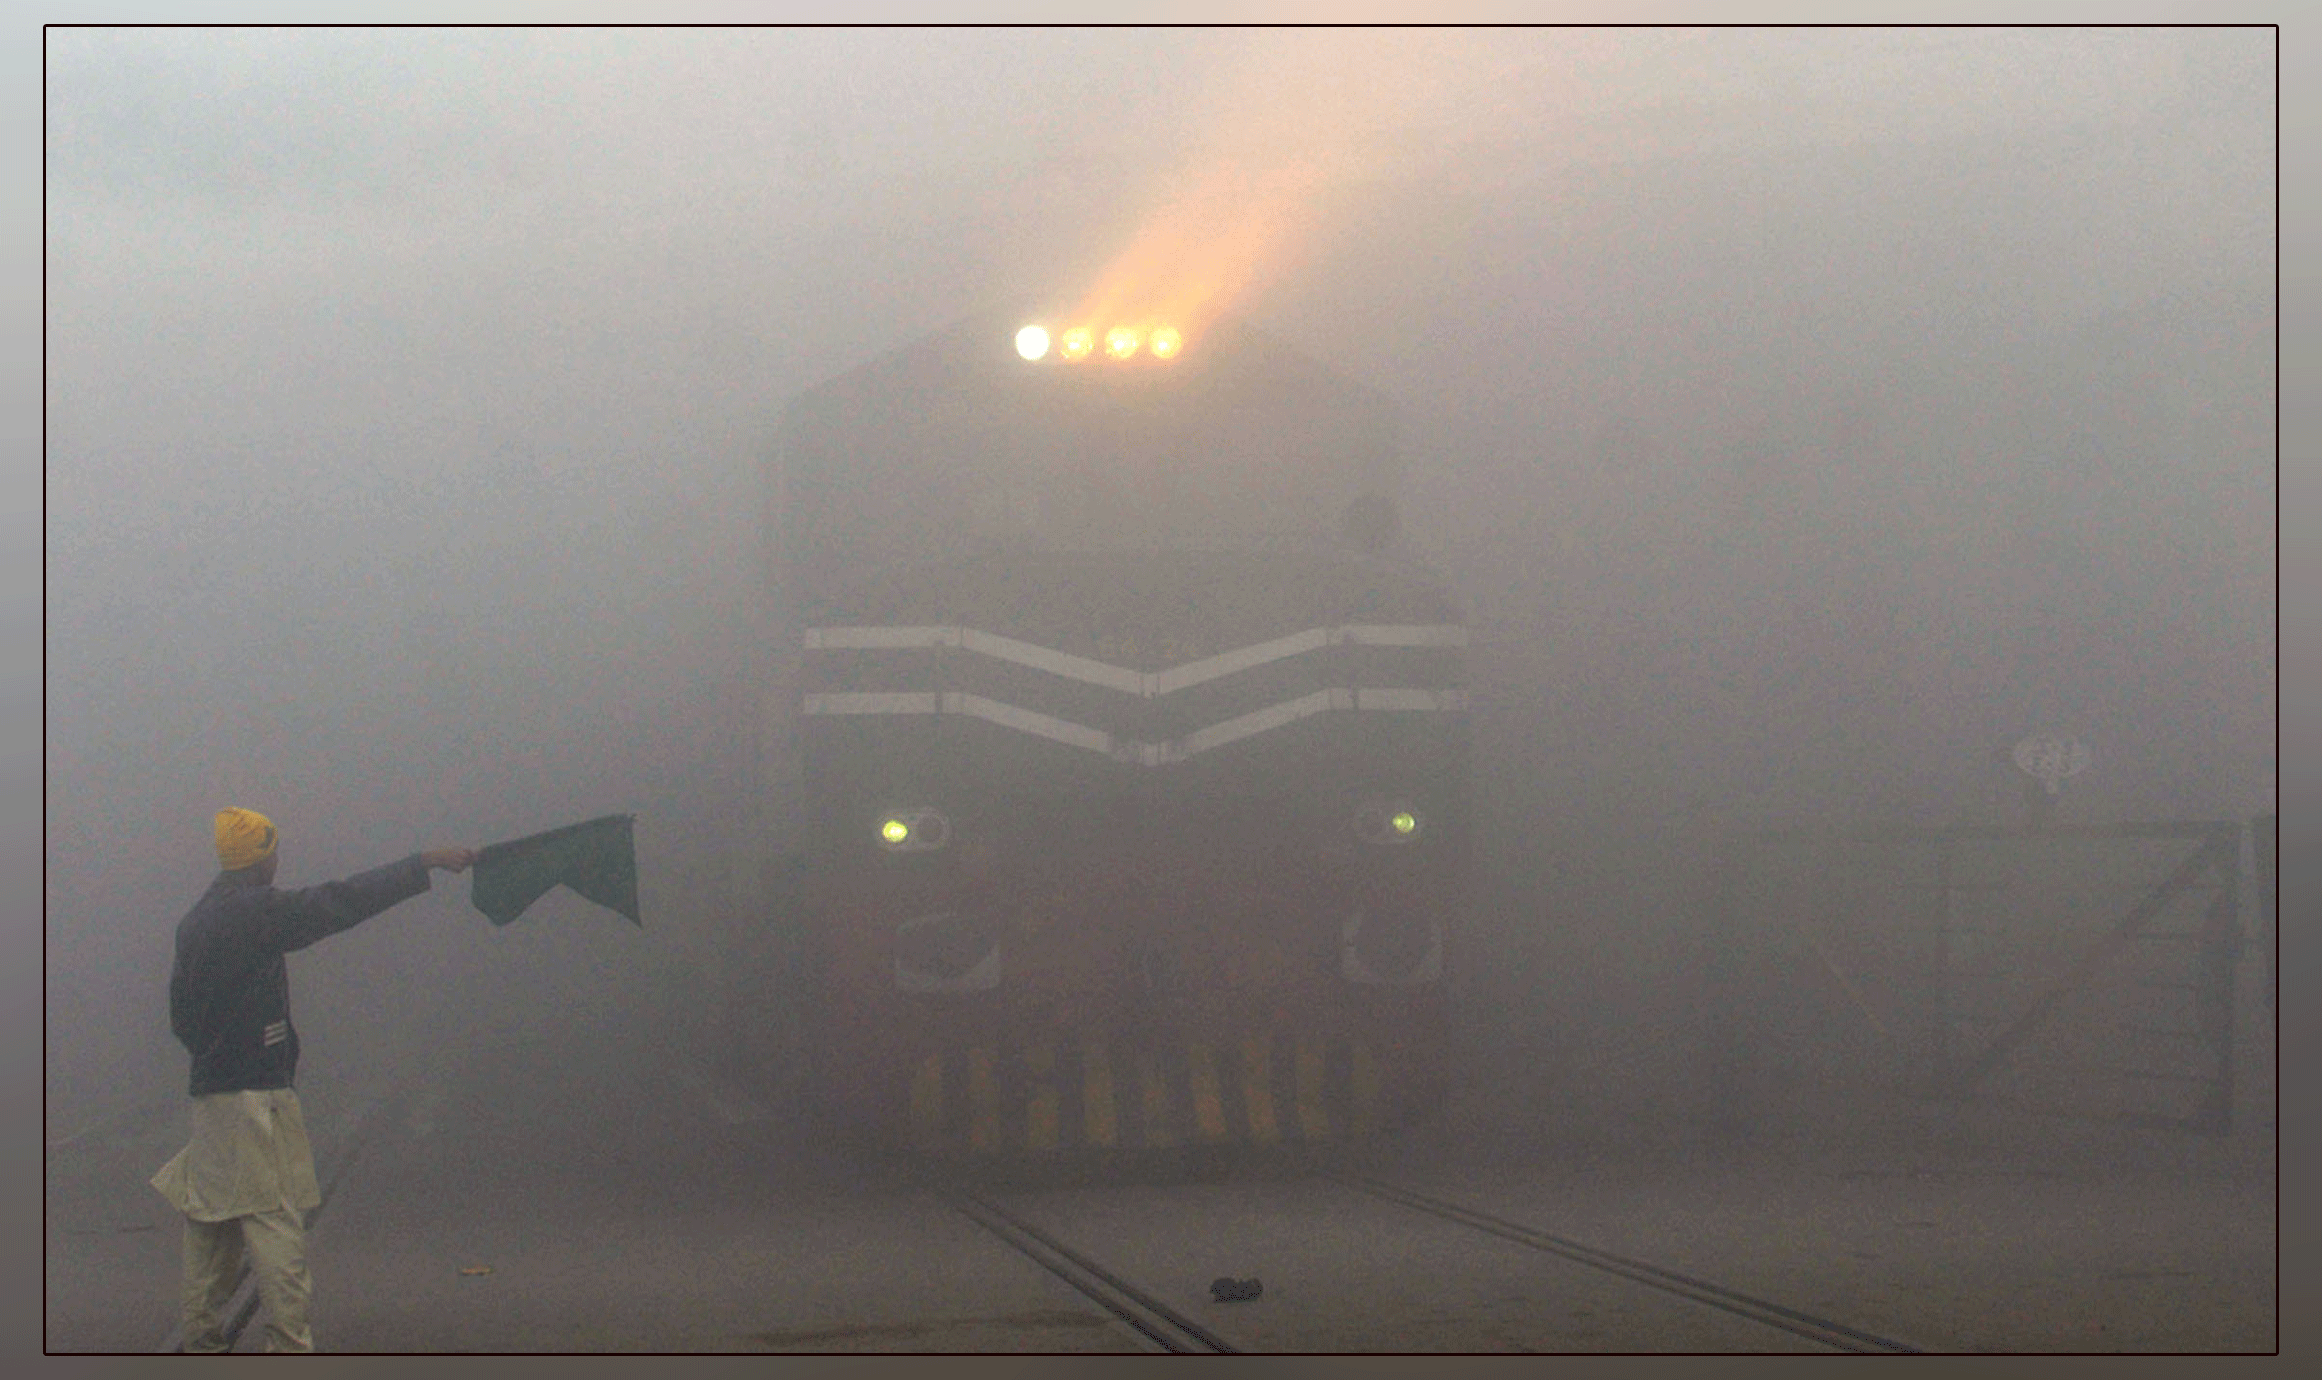 The weather will remain cold in most parts of Punjab province with heavy fog at night